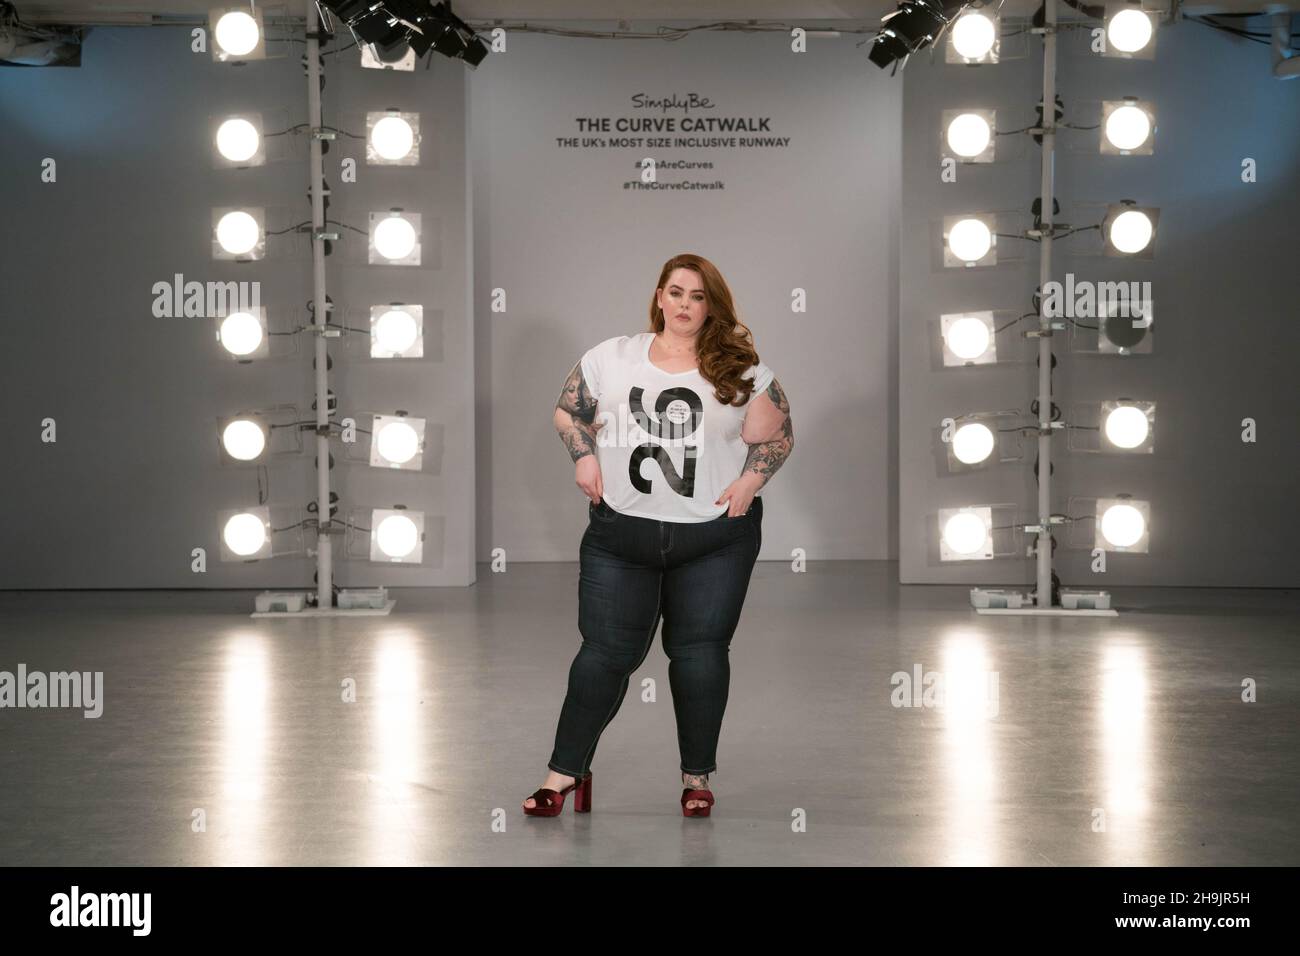 Models (left to right) Tess Holliday, Kelly Knox, Callie Thorpe, Felicity  Hayward, Sonny, Ali Tate and Hayley Hasselhof at a photo call for the Curve  Catwalk, a fashion show celebrating diversity of